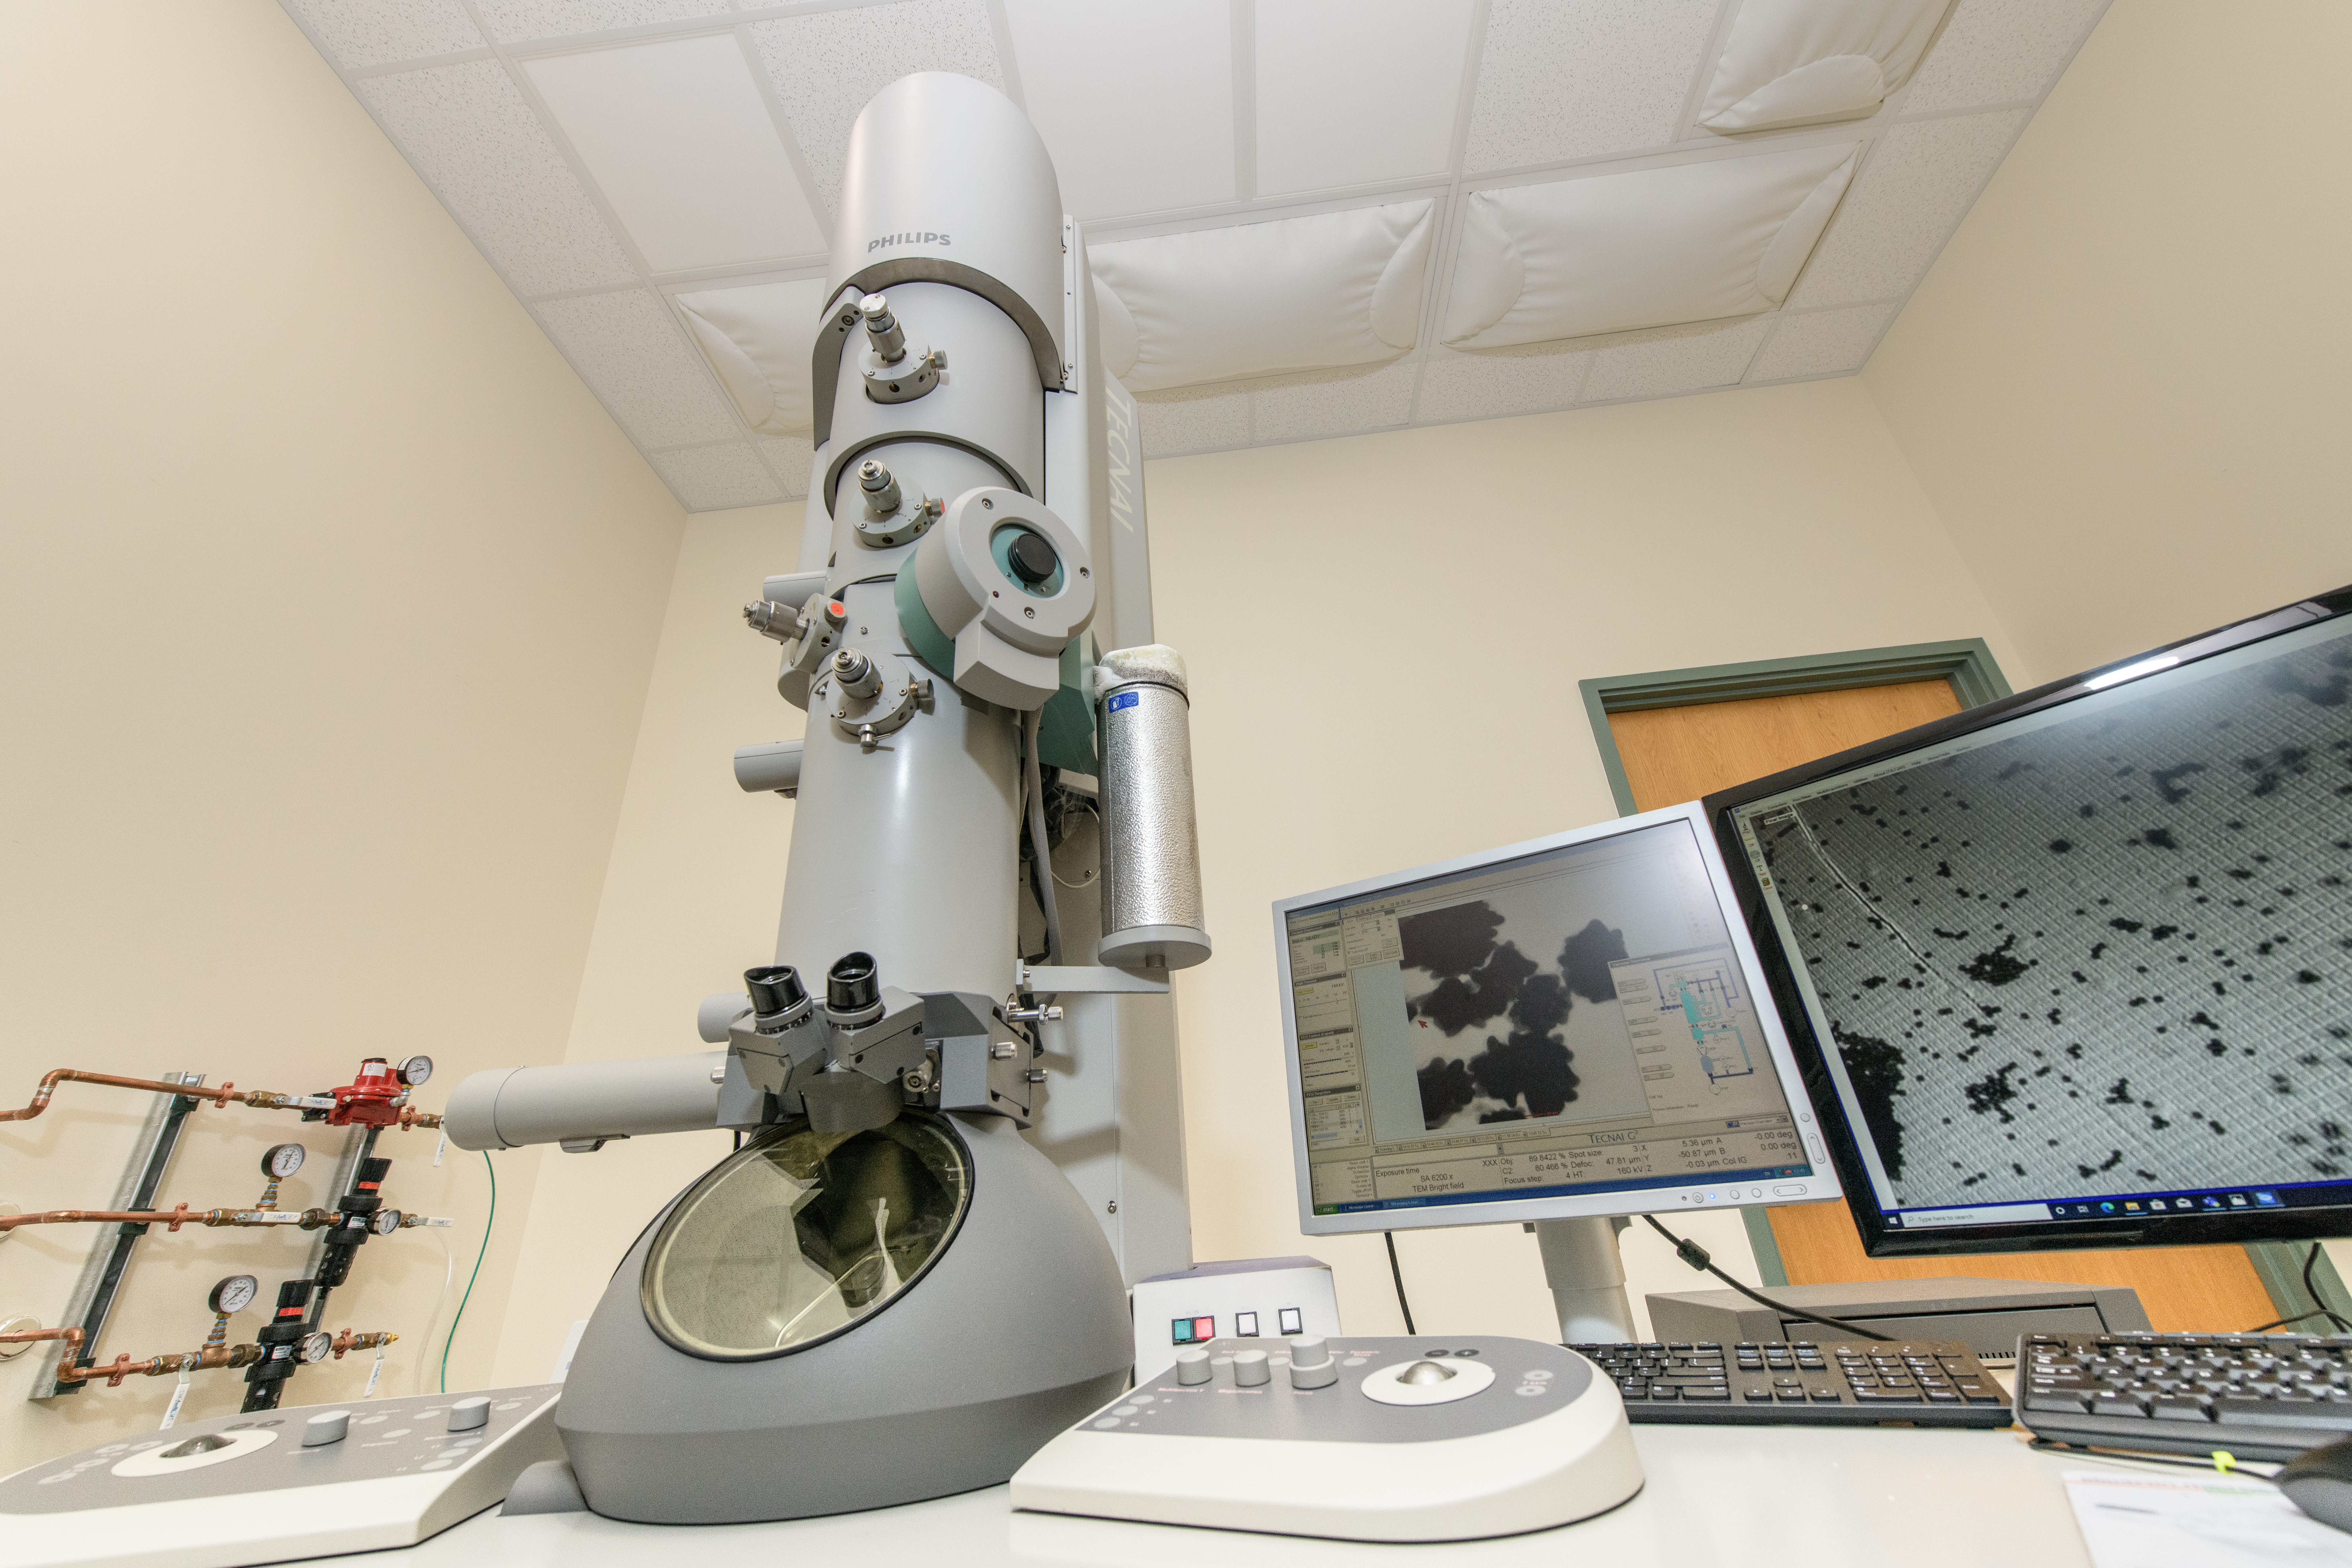 With a photo taken from below, the microscope appears to loom large in the lab, emphasizing its cutting-edge capabilities.